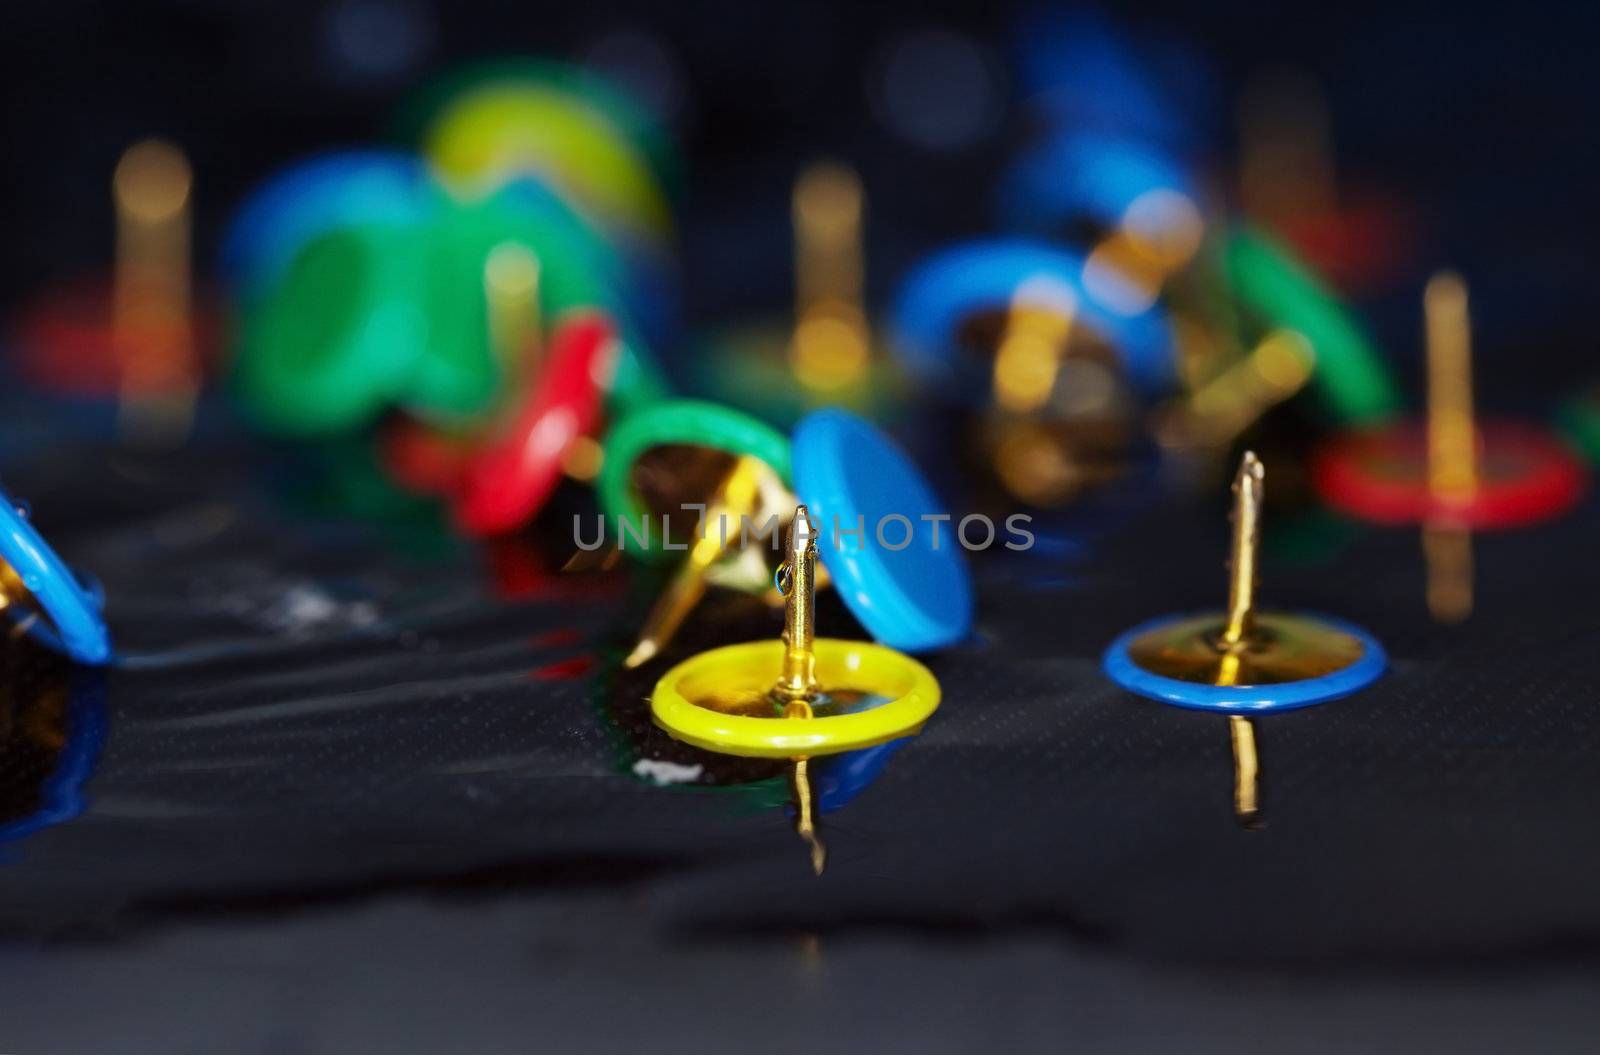 Extremely close-up macro photo of the pushpins in the water. Shallow depth of field and vibrant color for natural view